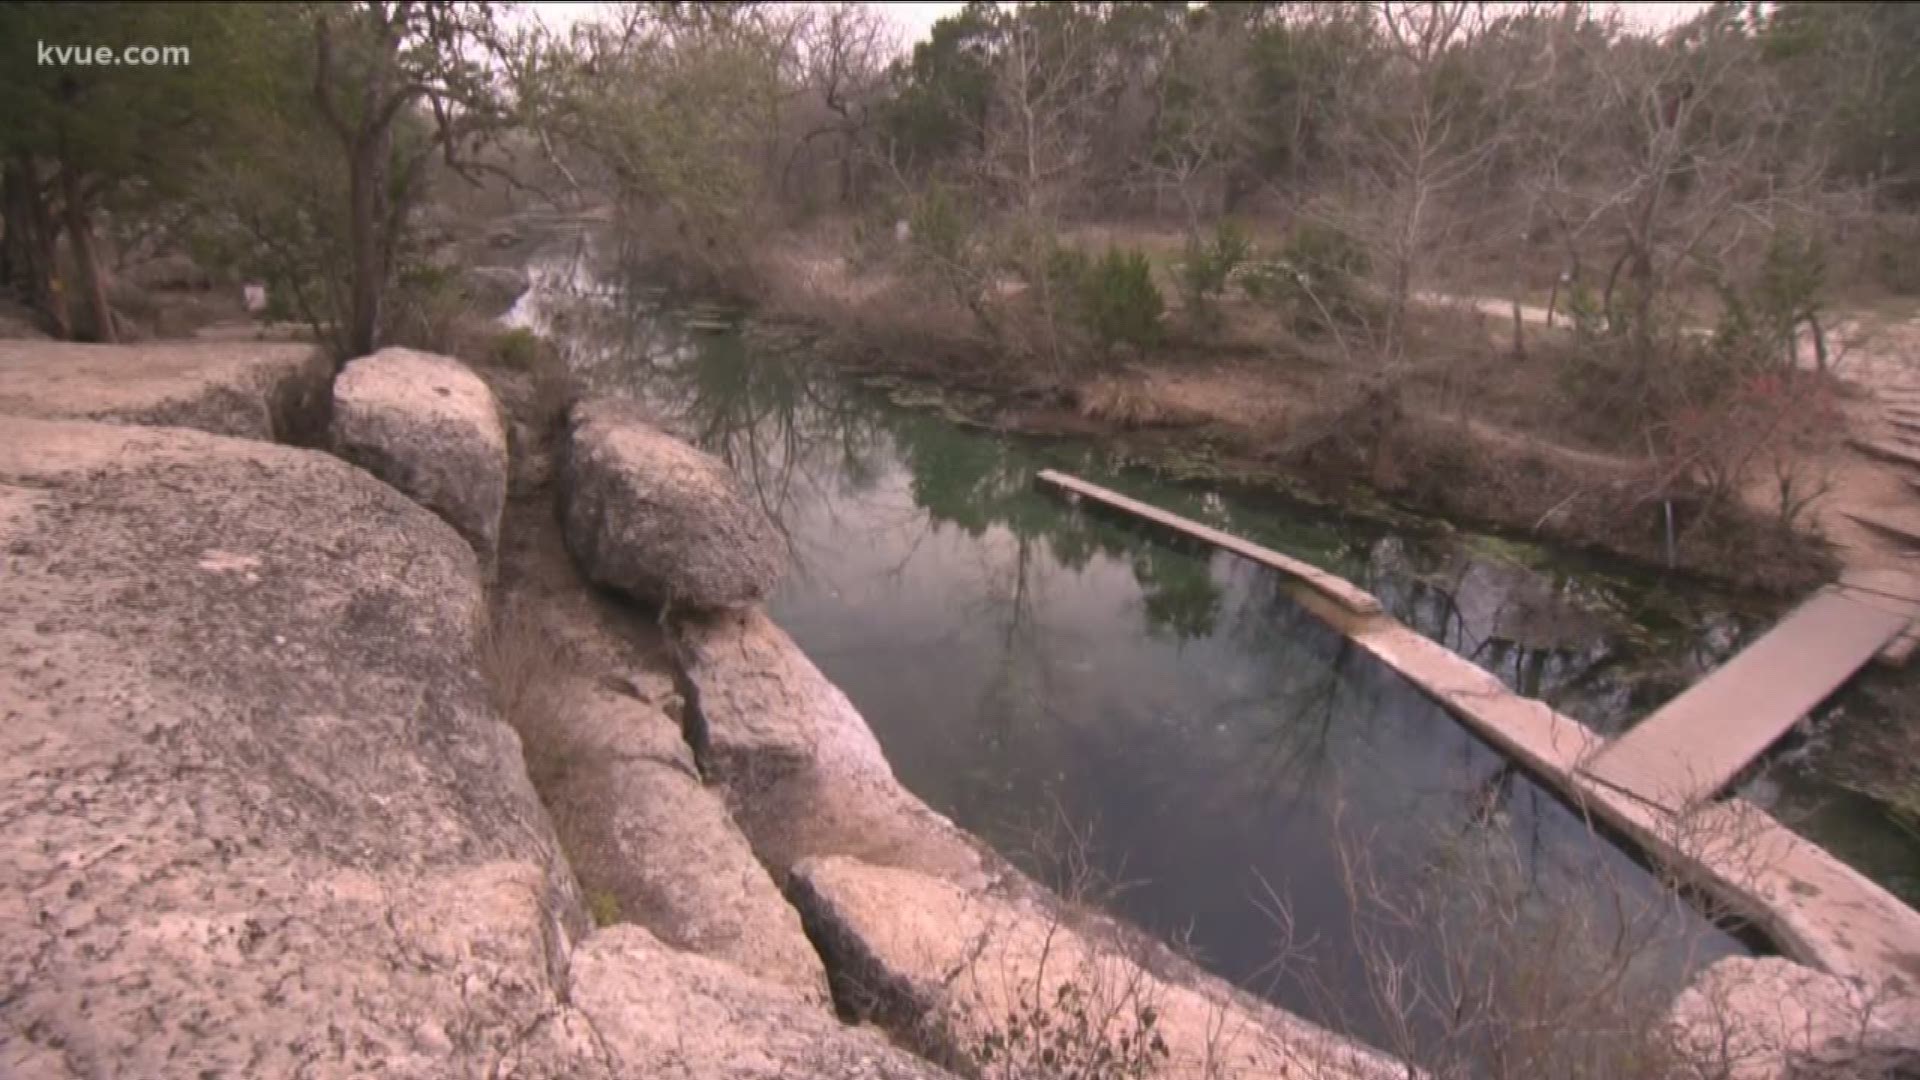 There's concern in Hays County over a proposed natural gas pipeline that may cut through some of the best-known recreational spots in Central Texas.